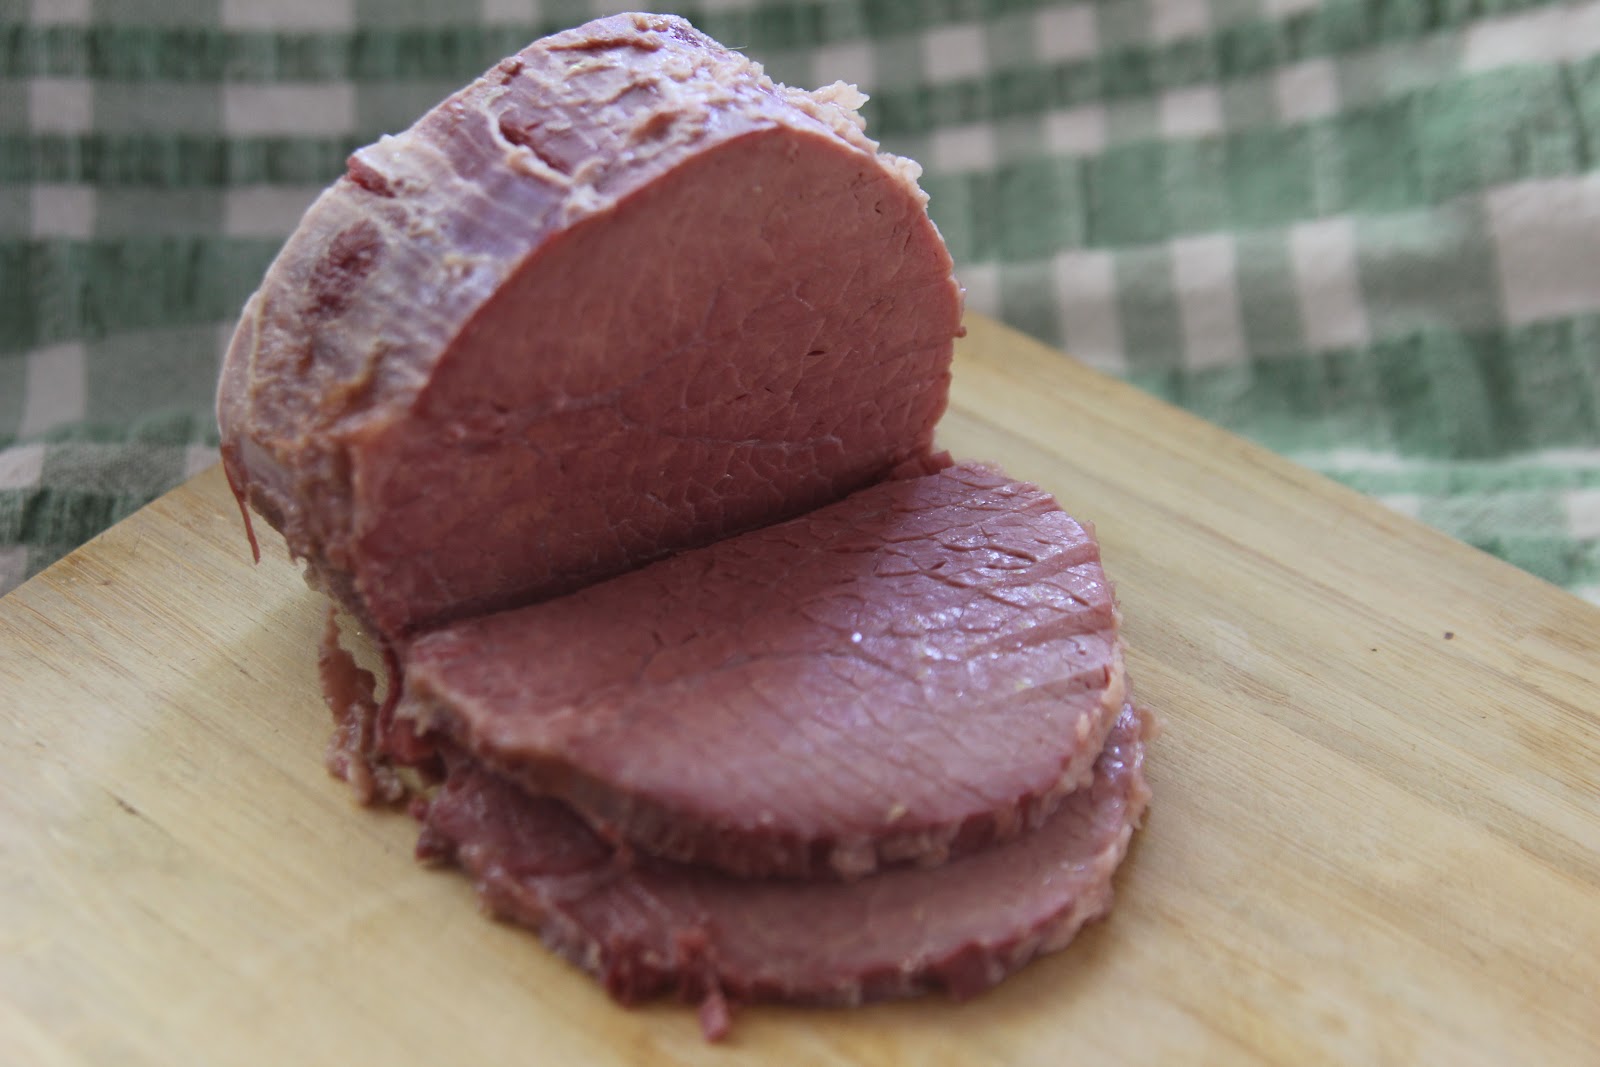 To Market To Market With San Diego Foodstuff Anticipating St Paddy S Day With Locally Corned Beef